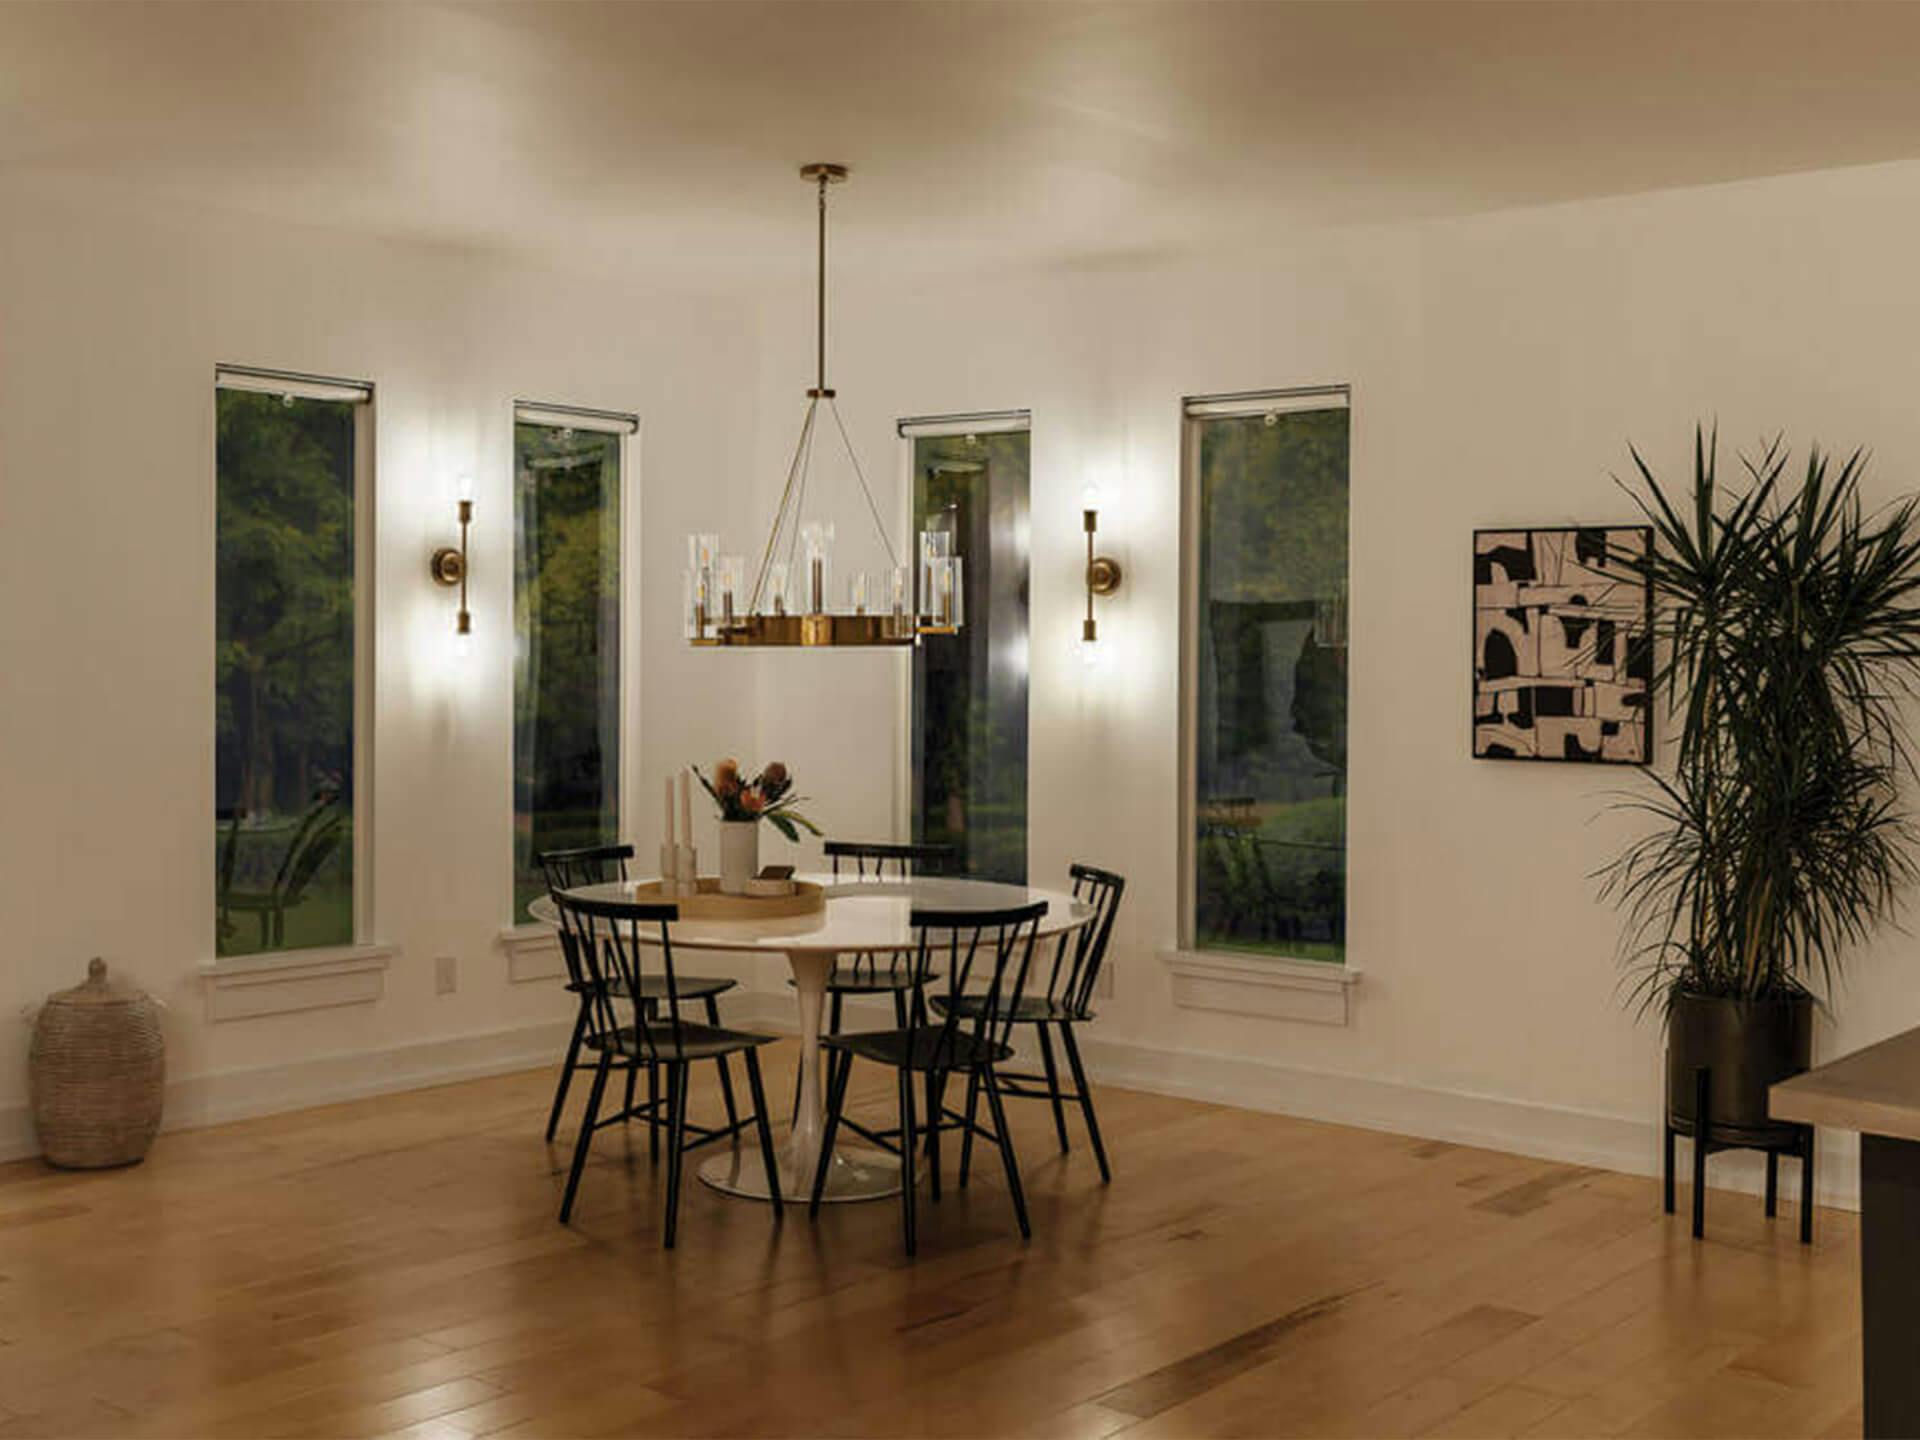 A dinning room lit with two Armstrong sconces and a Cleara Chandelier turned off above a dinning table at night 